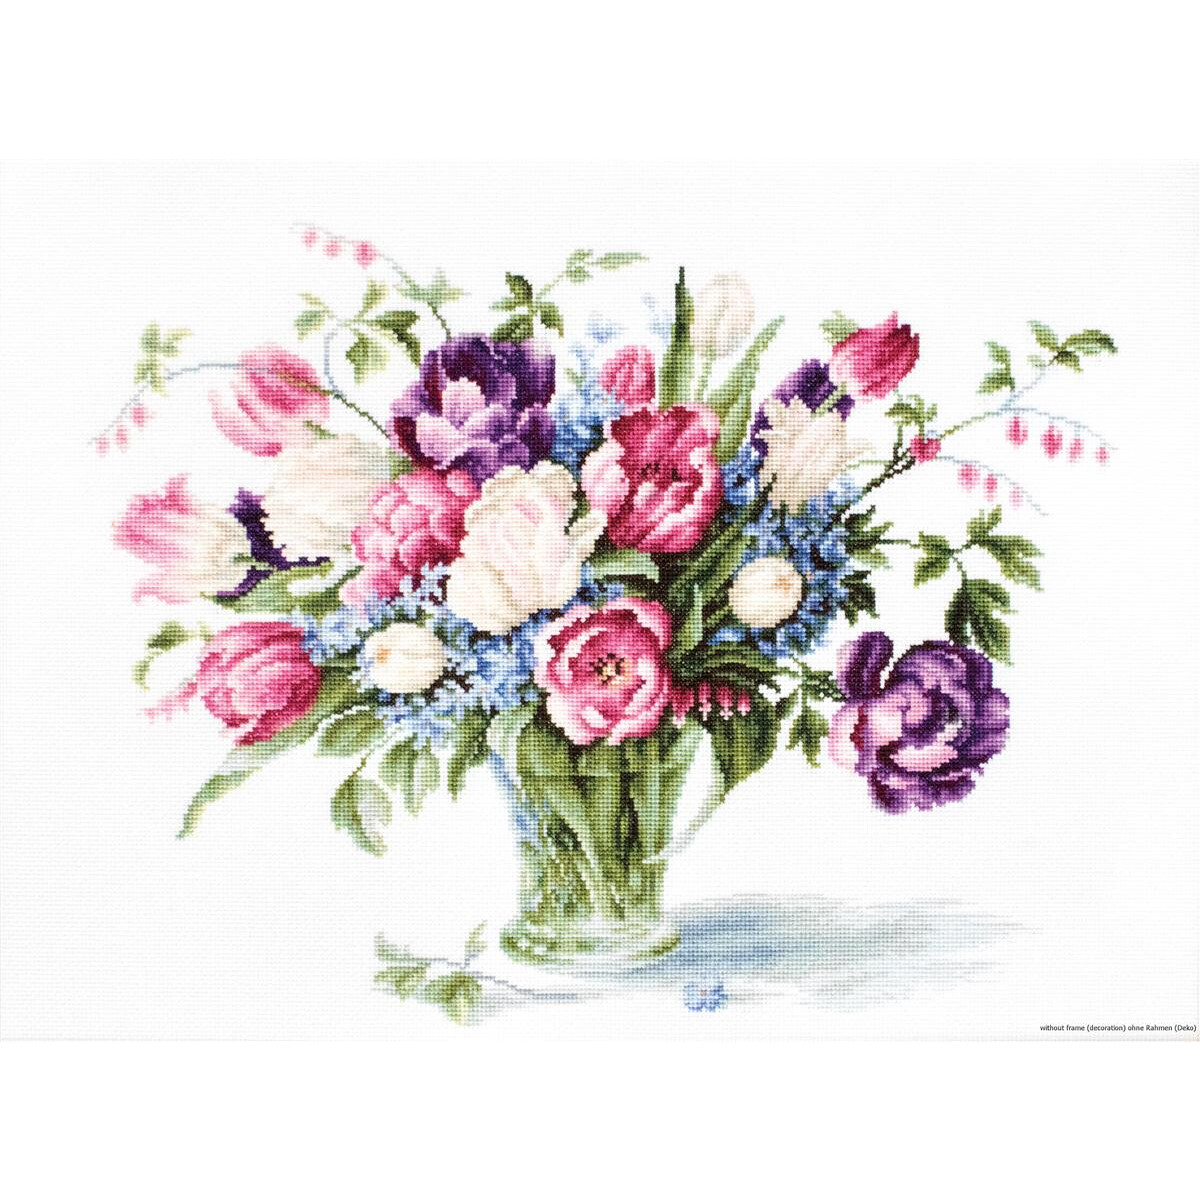 A glass vase contains a colorful bouquet of pink peonies,...